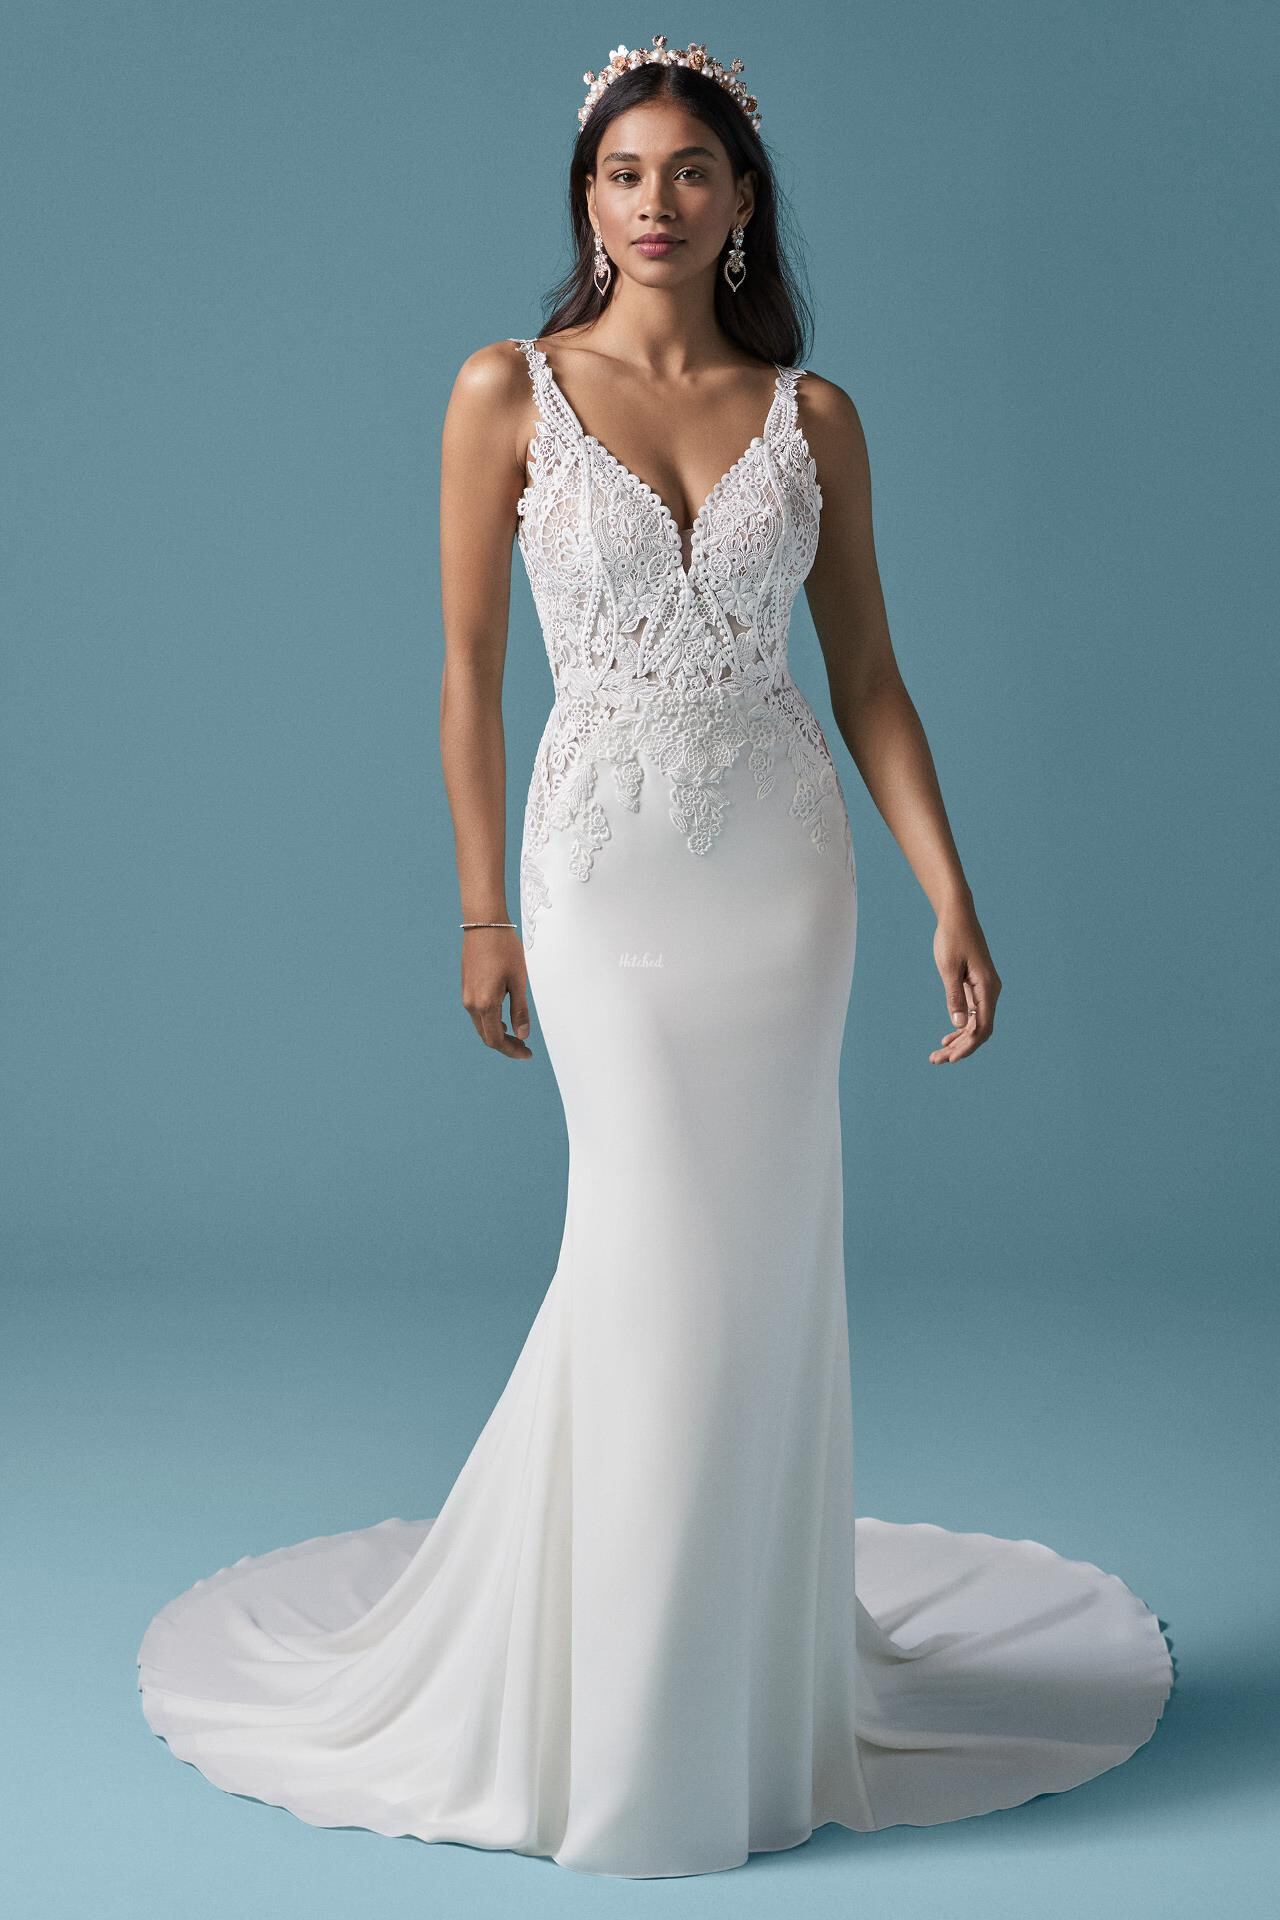 Great Maggie Sottero Short Wedding Dress  Don t miss out 